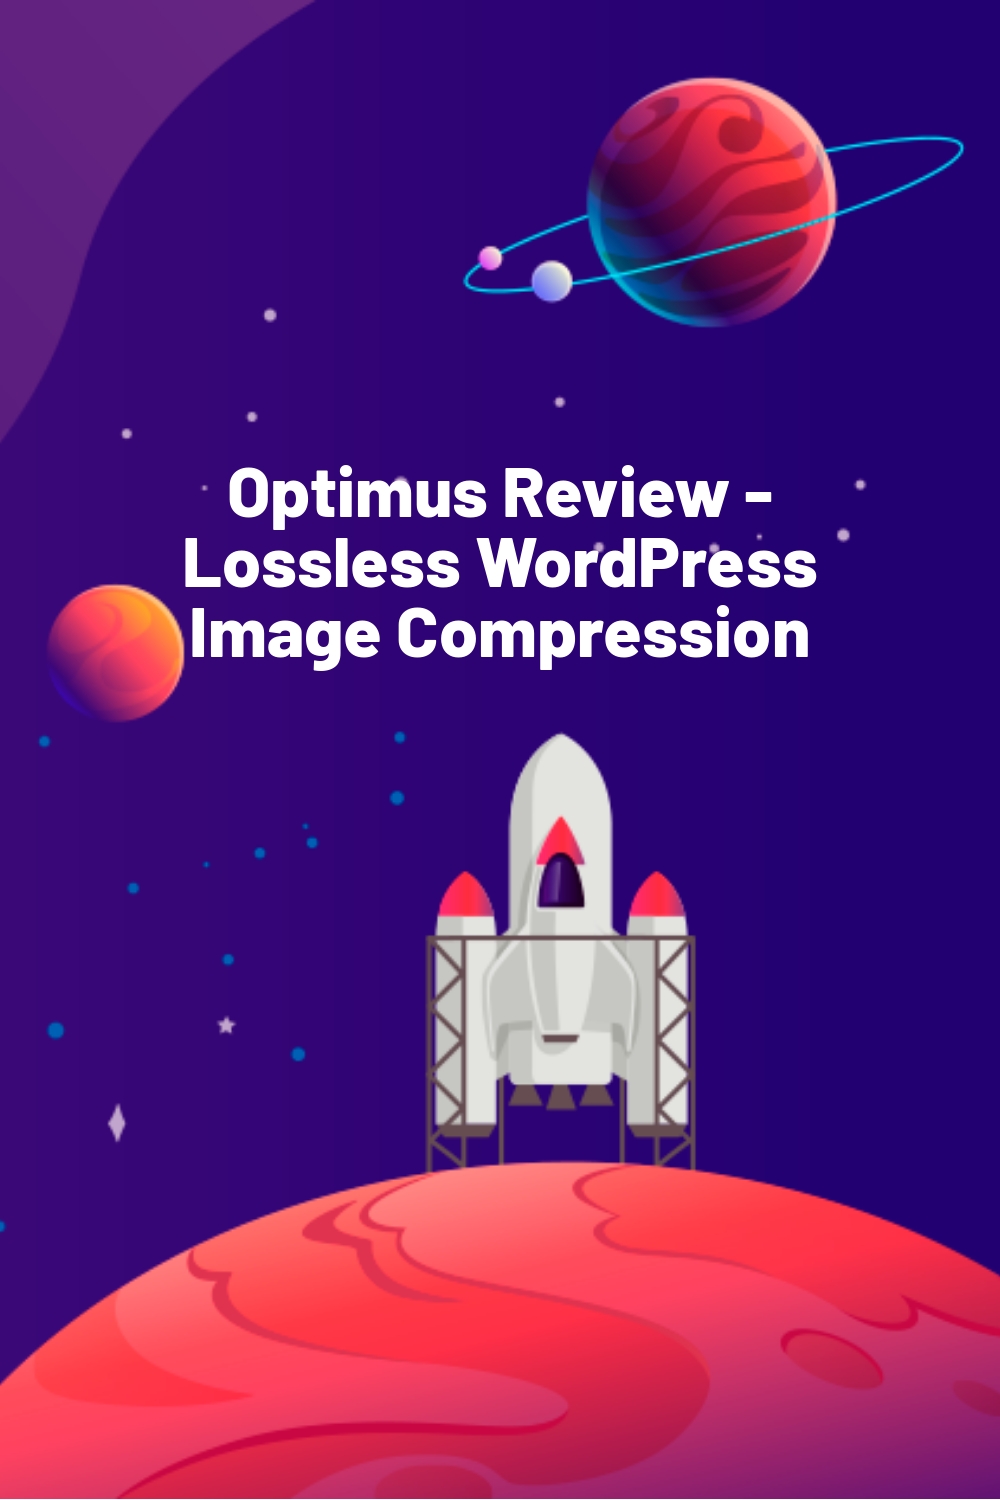 Optimus Review – Lossless WordPress Image Compression